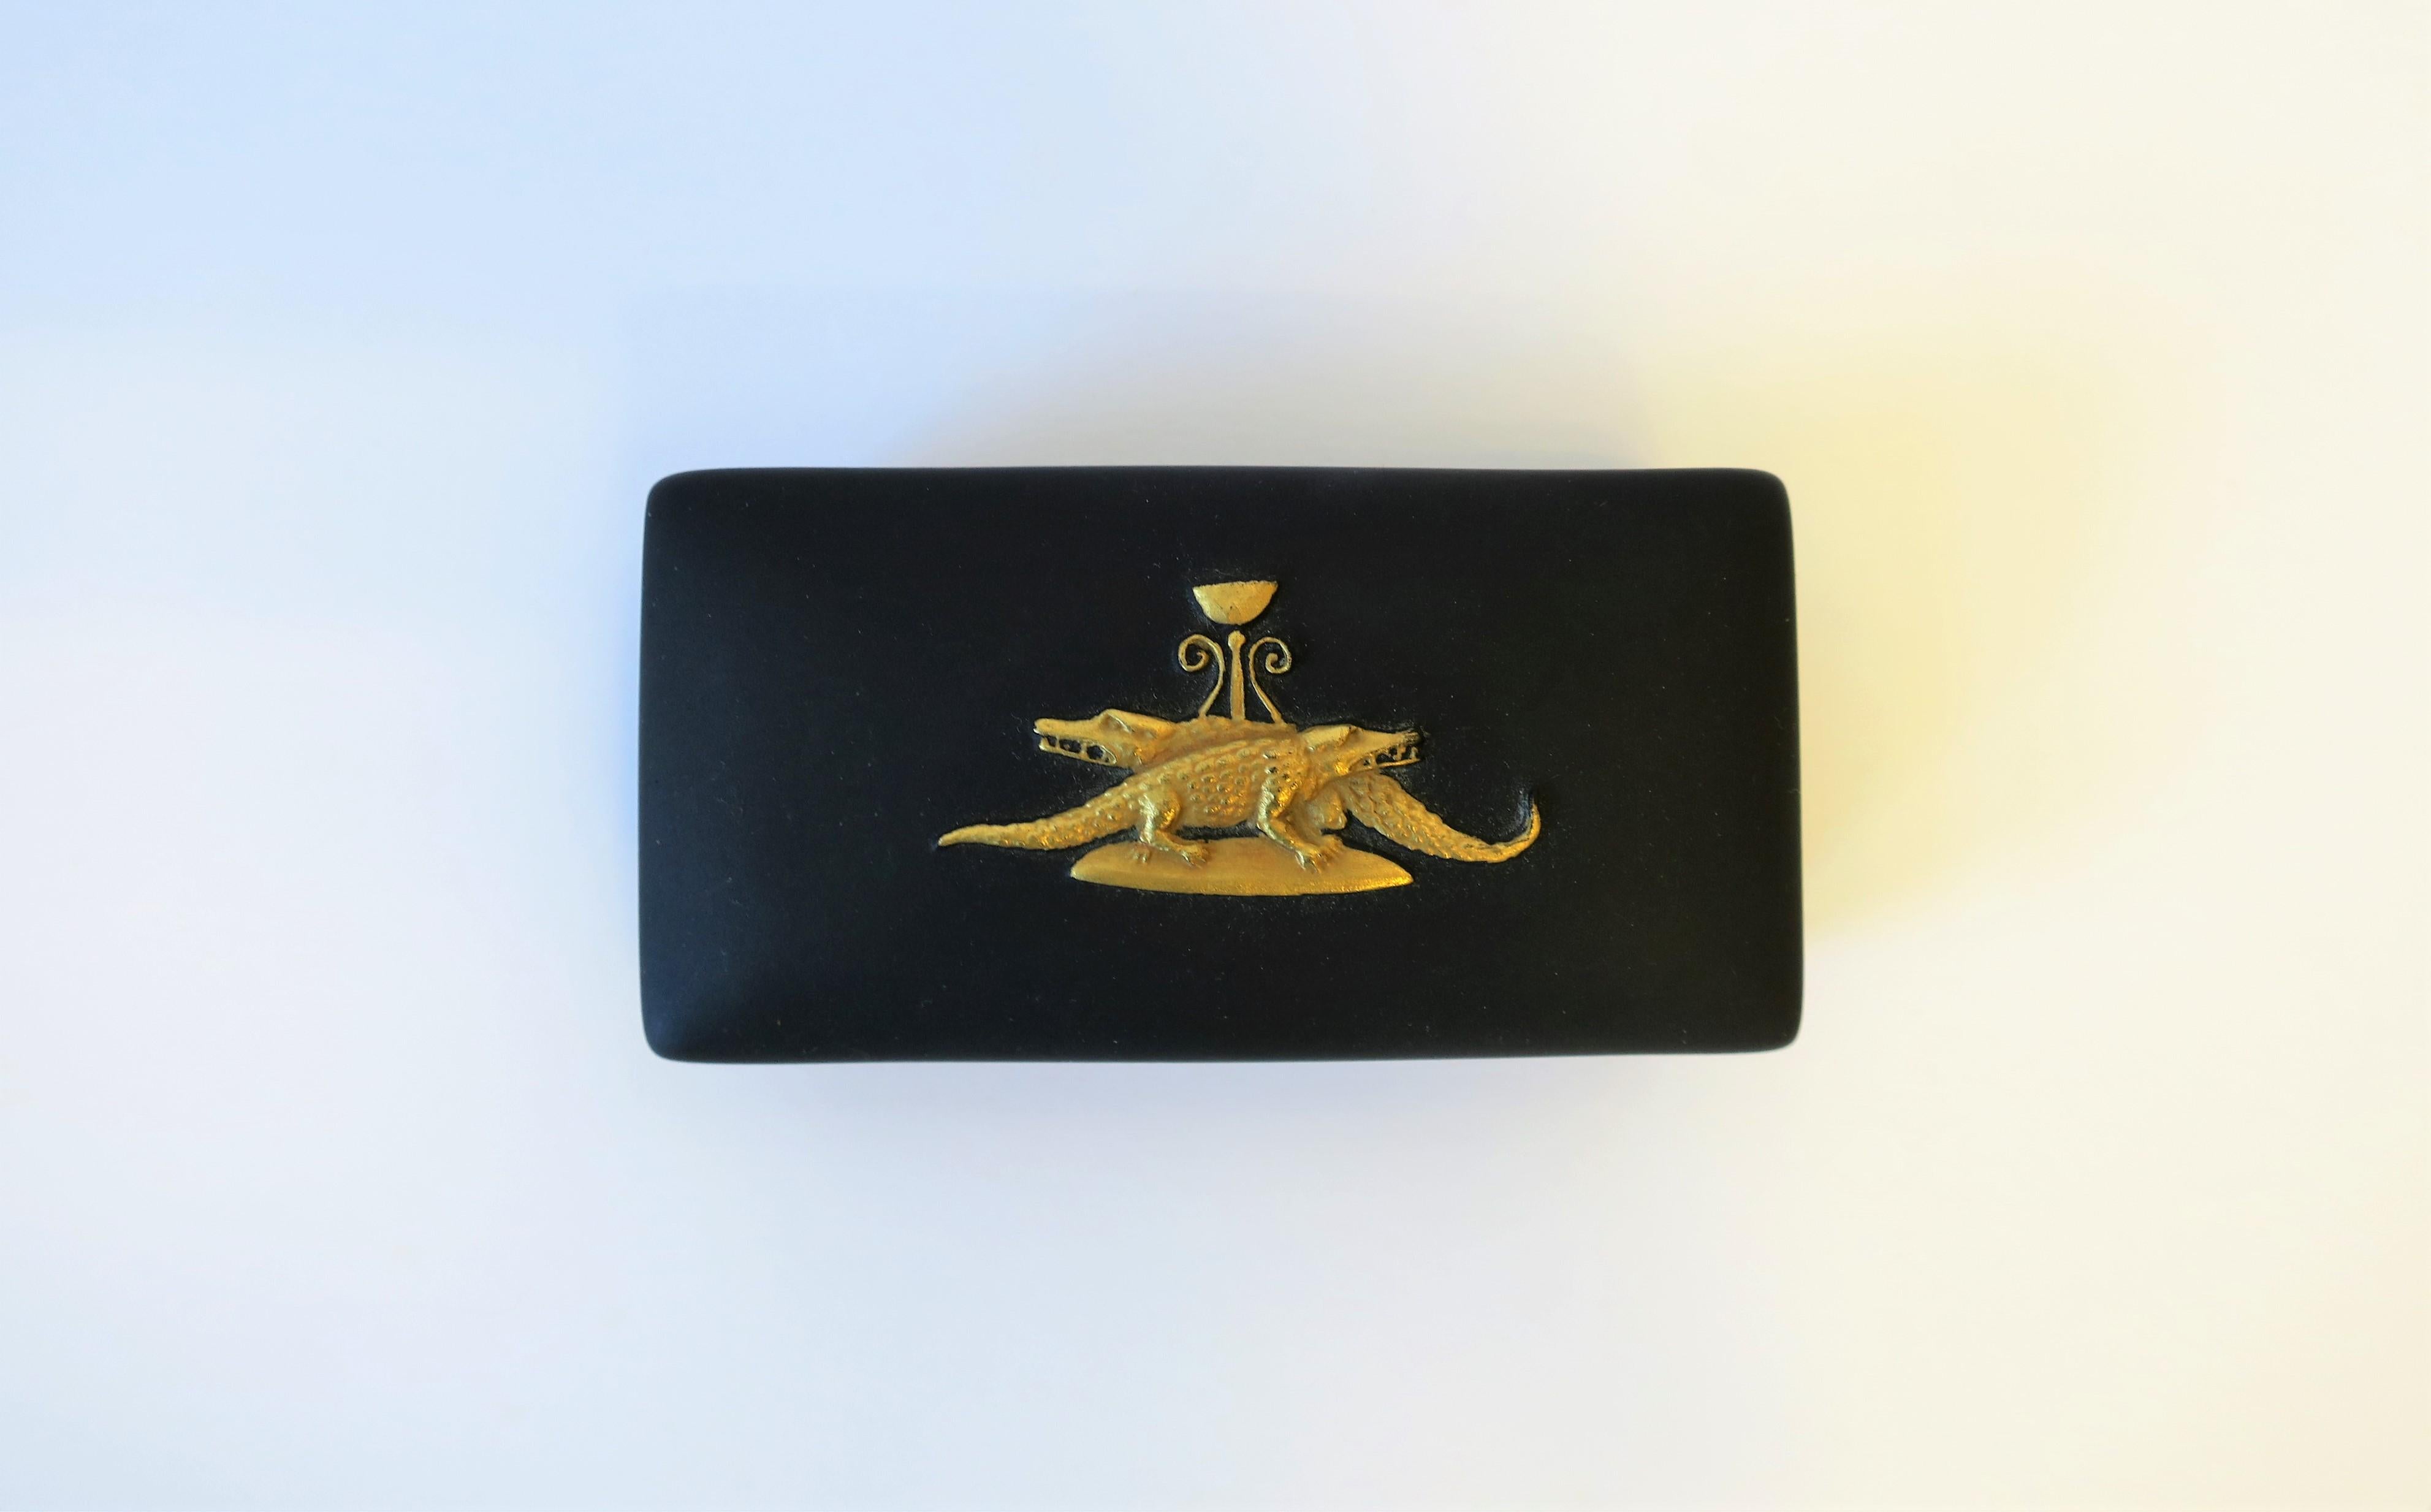 A chic and rare English Jasperware matte black basalt and gold box, by Wedgwood, England. A very beautiful small box with a gold raised relief of two alligators or crocodiles. Box is beautiful as a standalone piece or for small jewelry or other